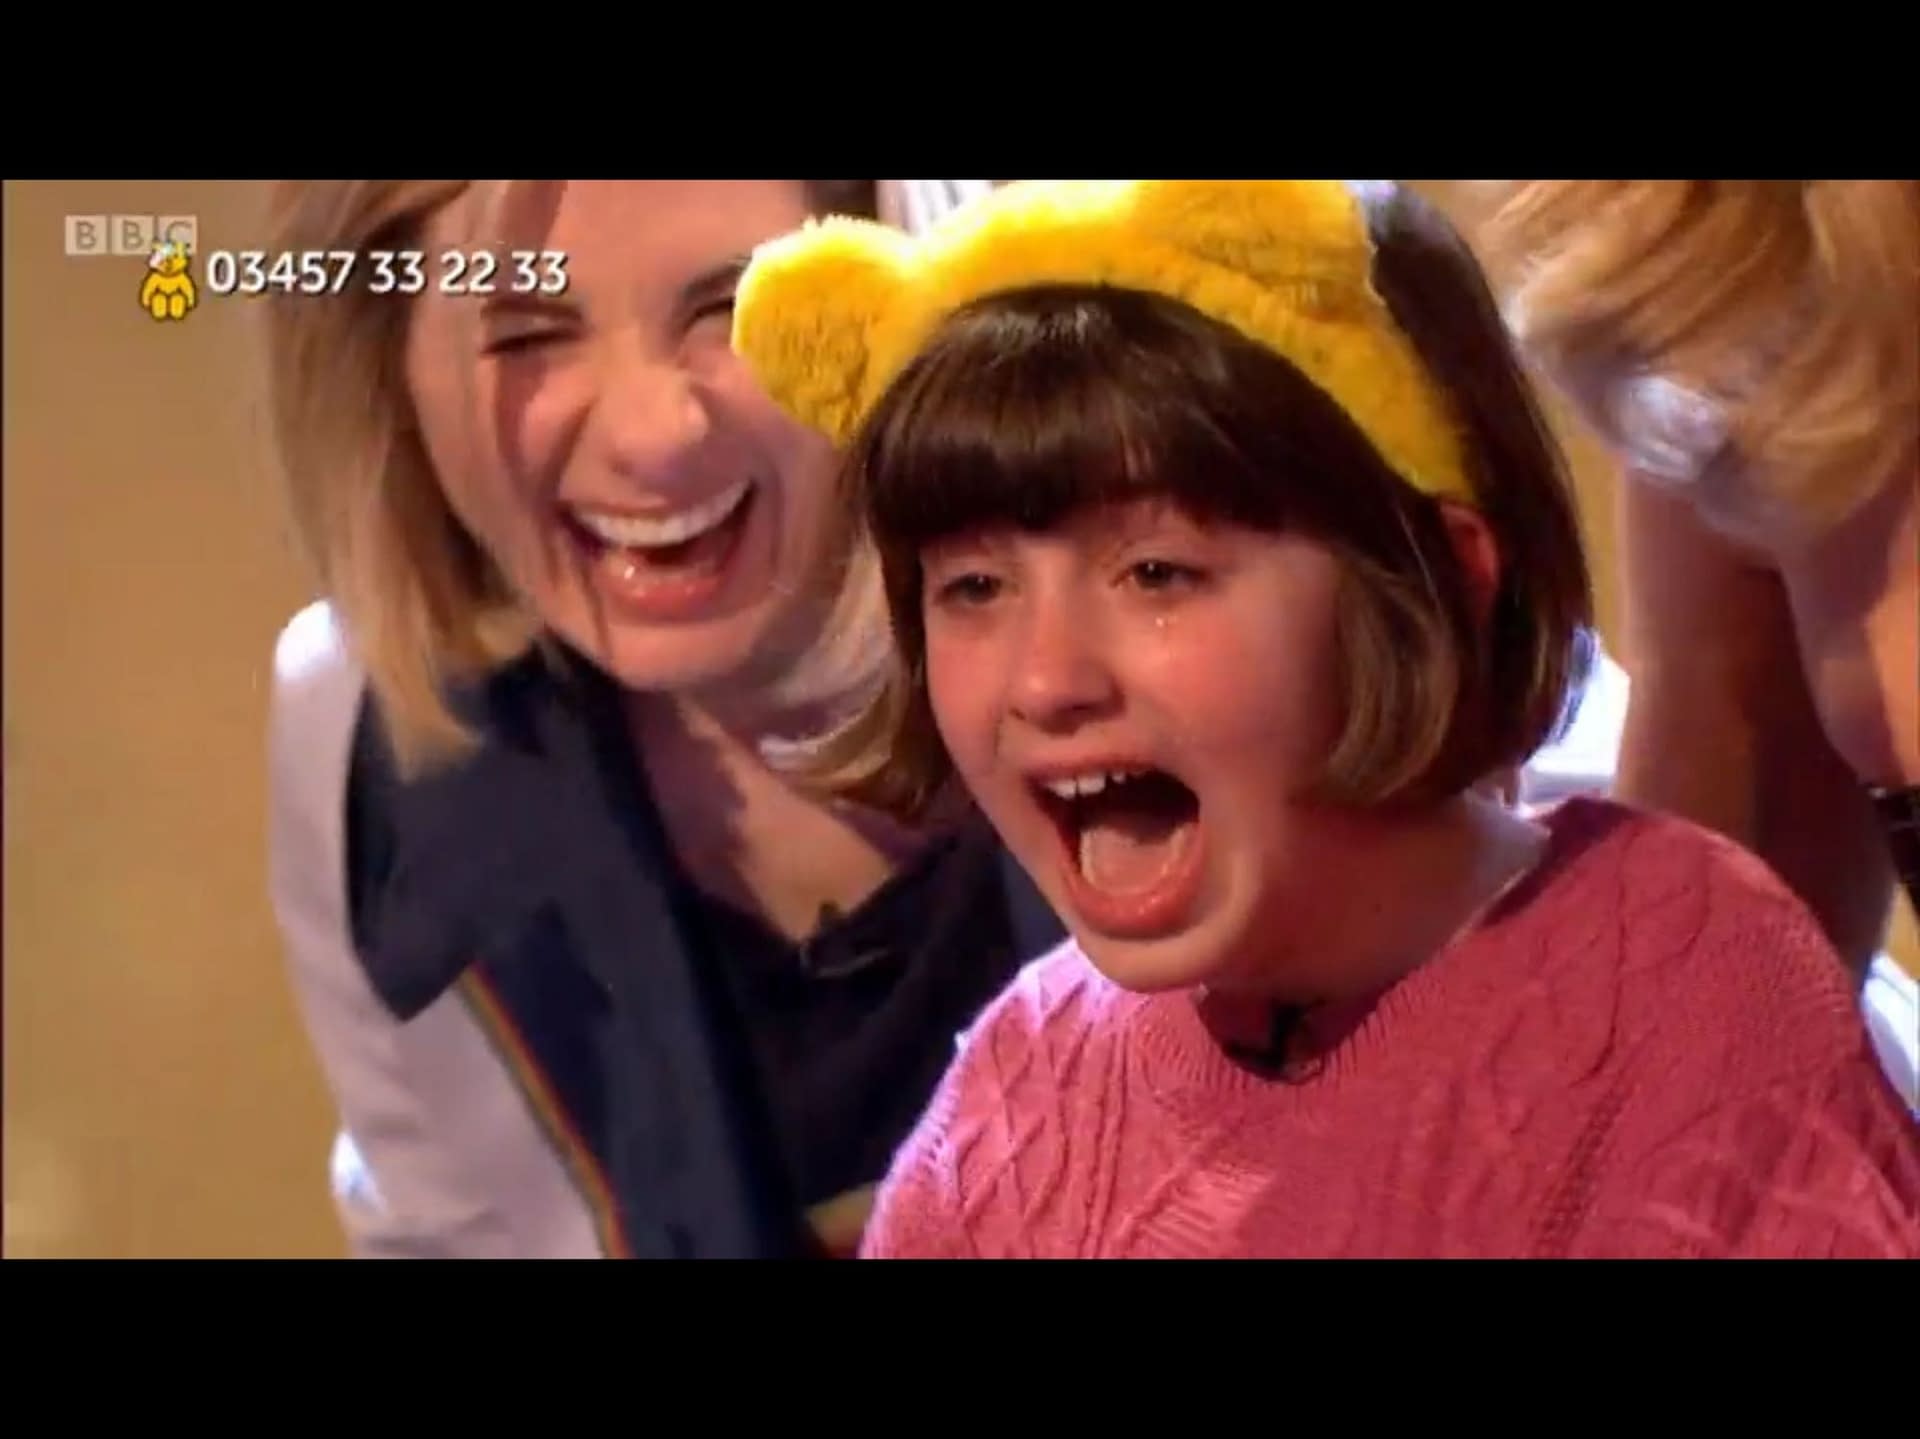 "Doctor Who": With "Children in Need", It's The Doctor &#038; Her Companions to the Rescue!